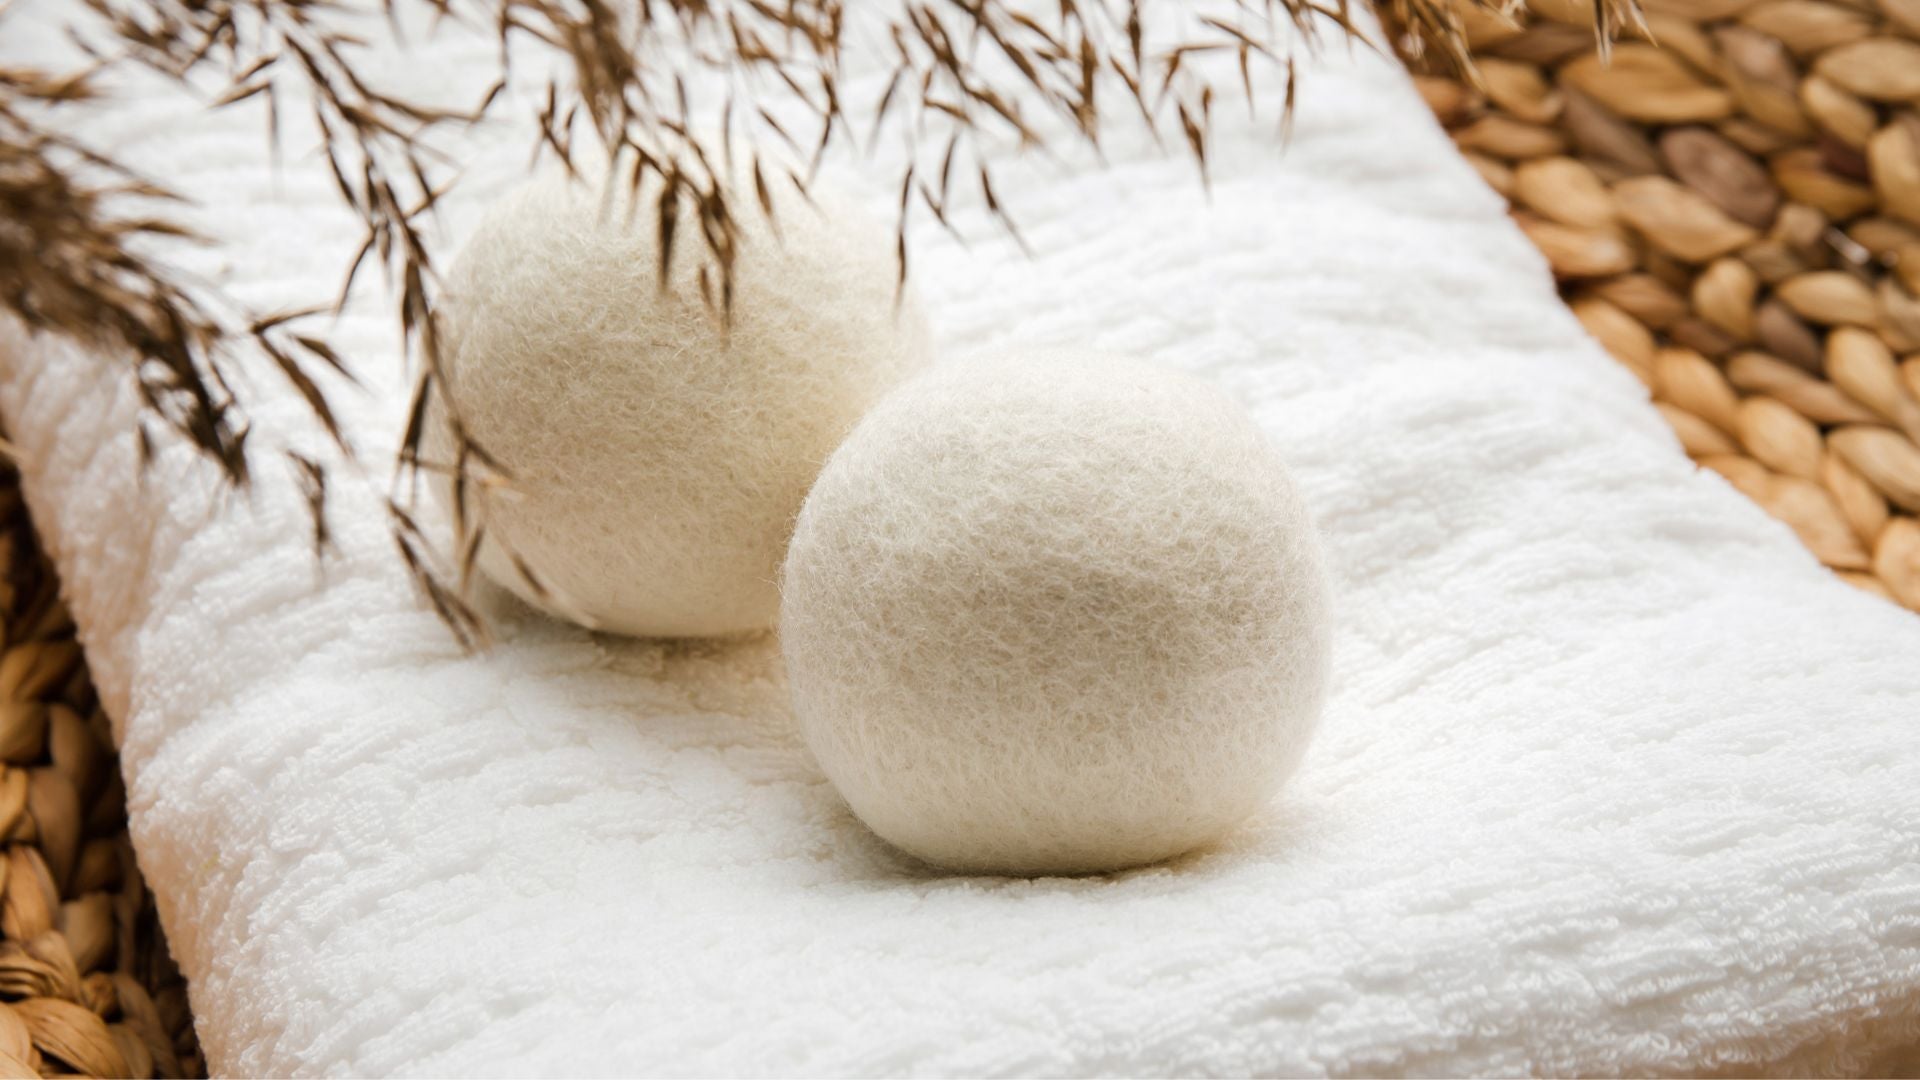 Care Tips to Extend the Life and Performance of Wool Dryer Balls